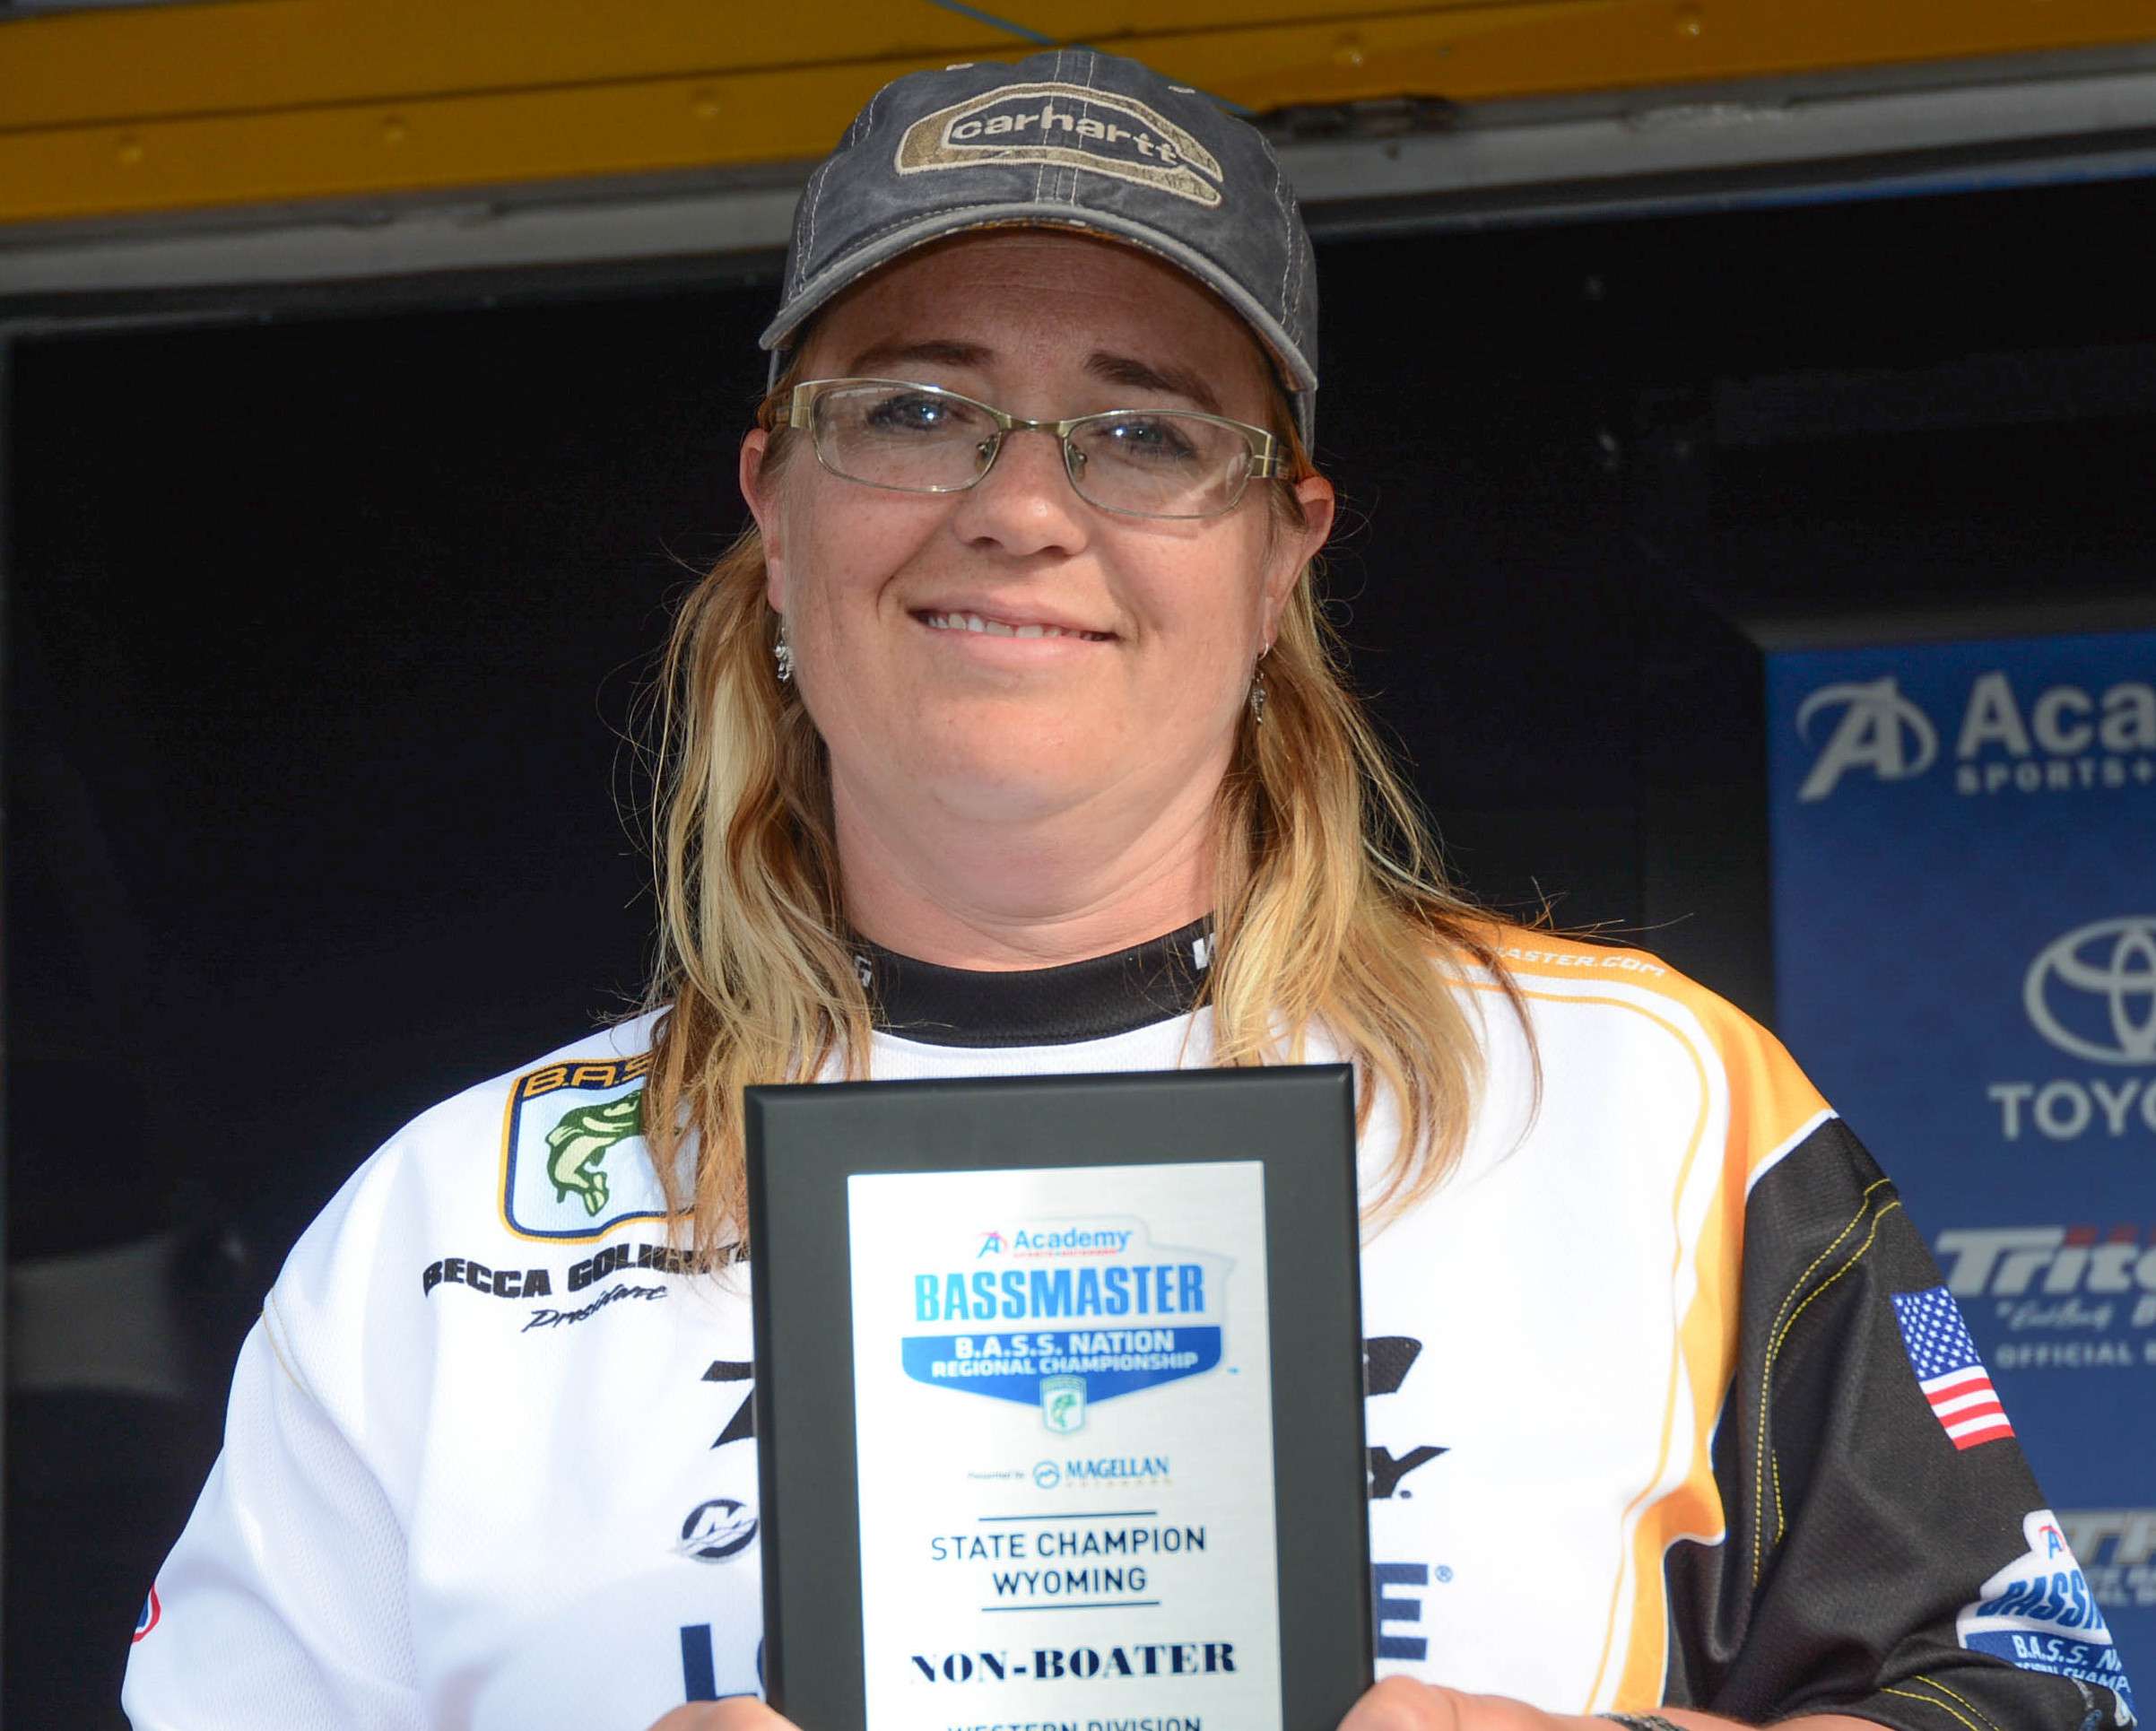 Becca Golightly <br>
Wyoming Nonboater <br>
Becca Golightly differs from everyone else in the field because â sheâs female! Sheâll definitely be easy to pick out of the crowd. The lone woman is a member of the Cache Valley Bassmasters, and sheâs the president of the Wyoming B.A.S.S. Nation. She works as an insurance agent, and she loves hunting, camping and being outdoors. Golightlyâs sponsors are the Wyoming B.A.S.S. Nation and Livingston Lures. Bill and Jaxon Golightly, her husband and son, are also her sponsors. And if you see Jaxon in person (he usually goes across the Bassmaster stage with either of his parents), youâll never forget his sweet face. 